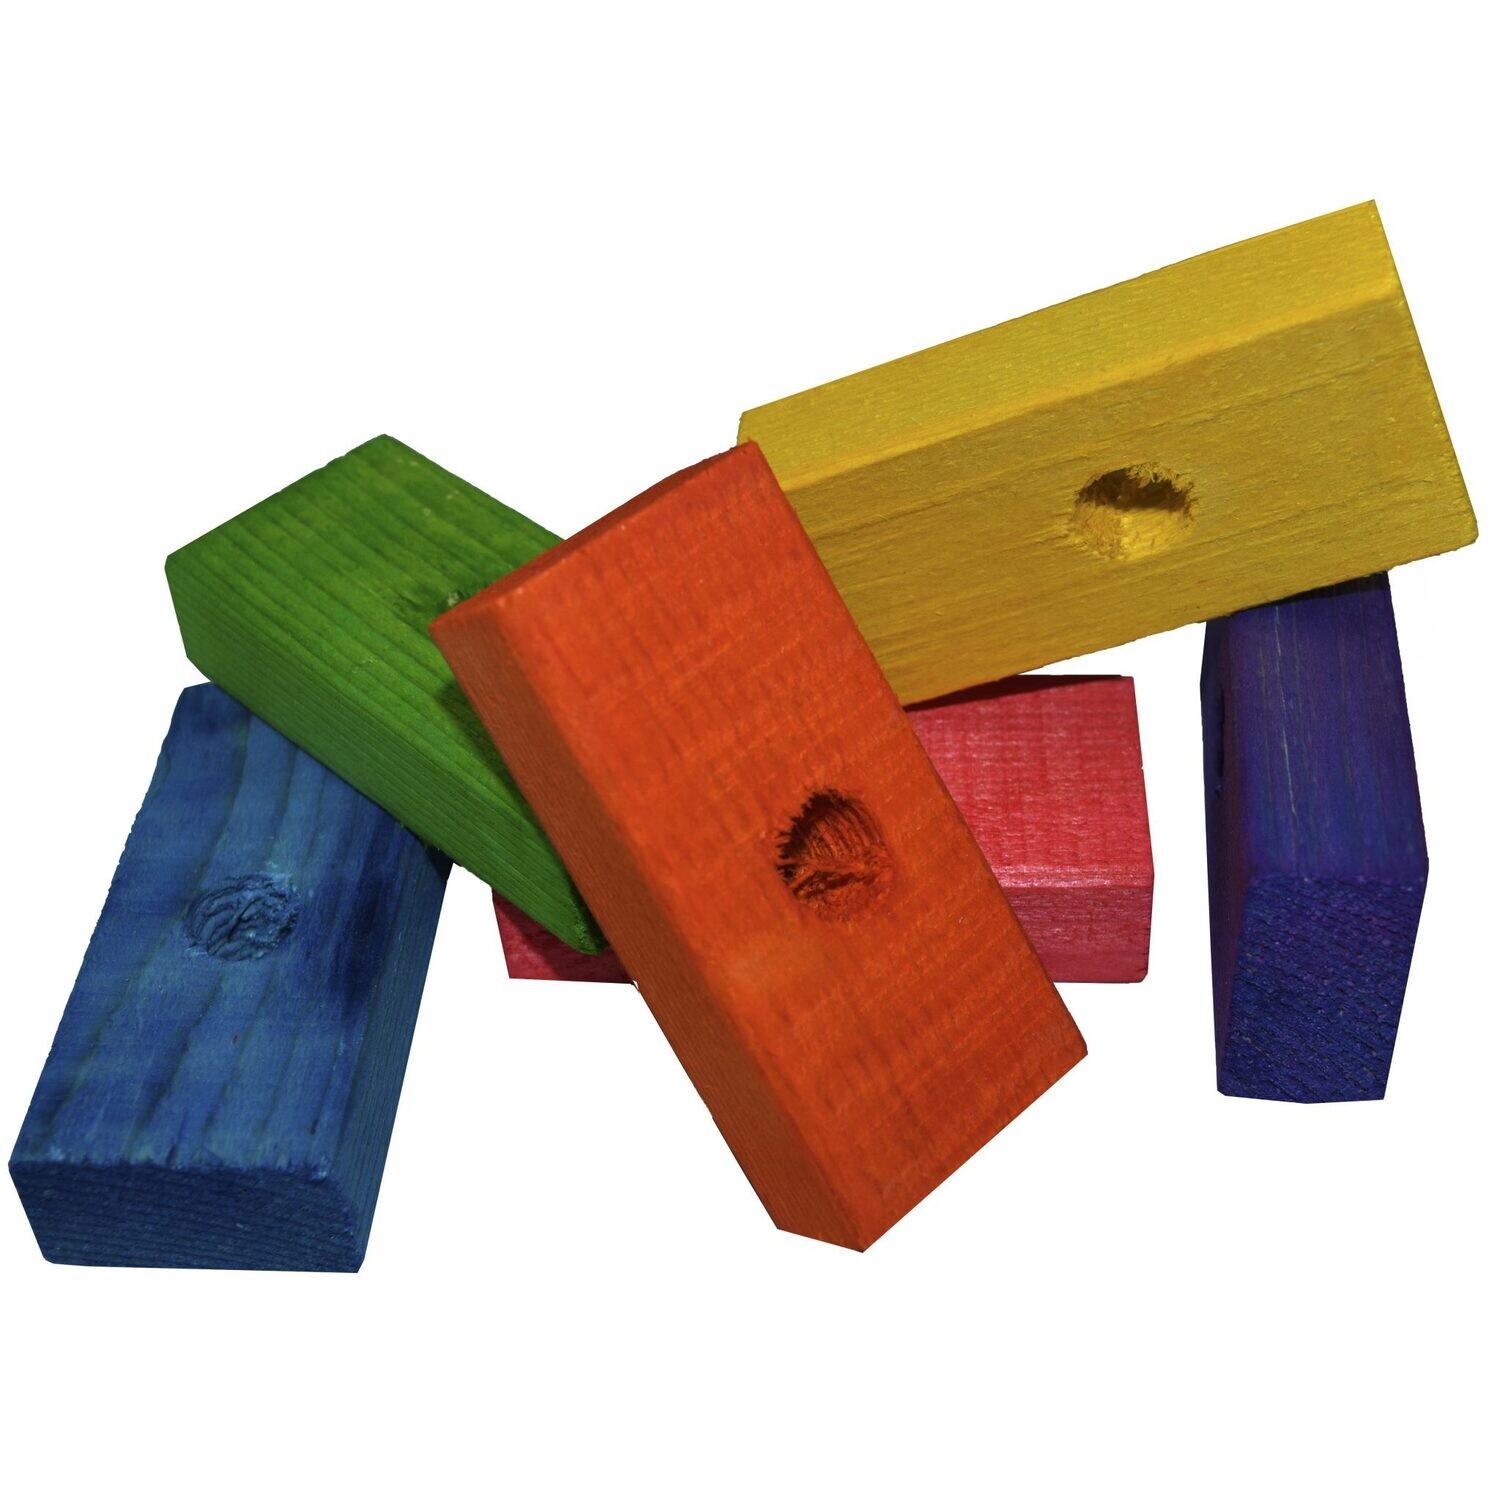 Multi Color Pine Blocks Pre-Drilled for Skewer, Chain or Rope approx. 3" long x 3/4" wide - 60 Count by Super Bird Creations